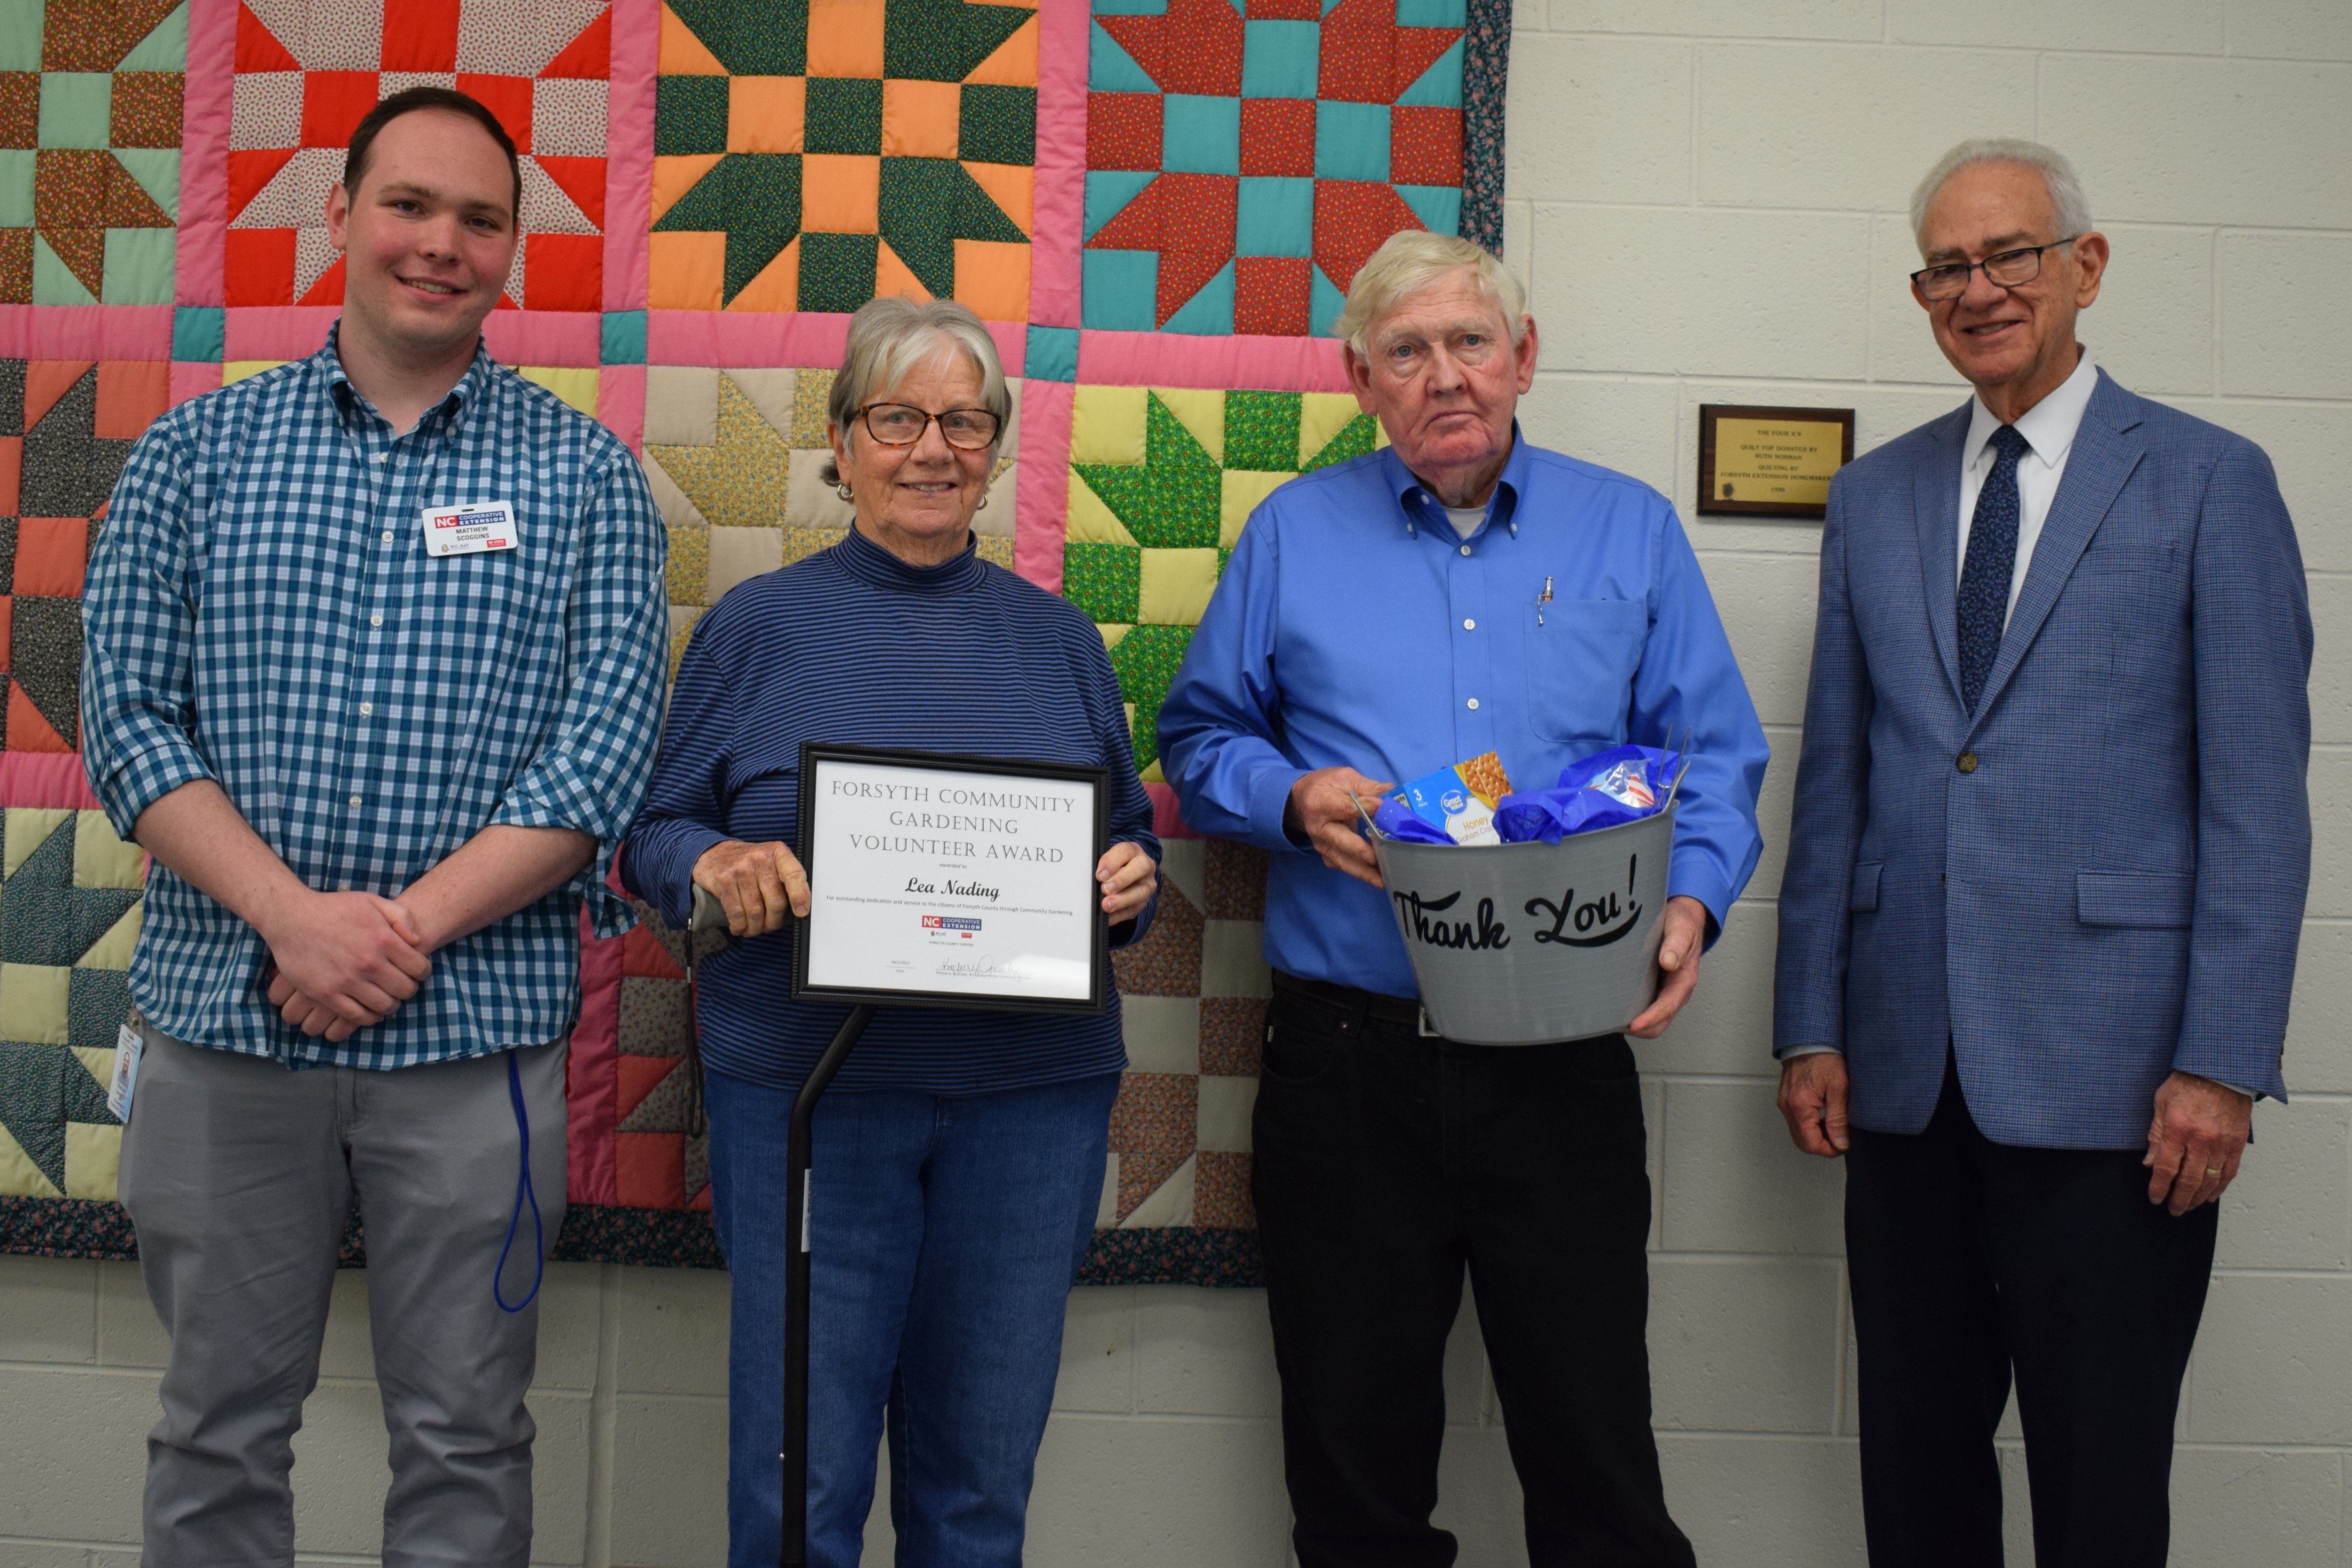 Community Gardening Volunteer Award Recipient, Lea Nading, with Community Gardening Coordinator, Matthew Scoggins, and Forsyth County Commissioners Richard Linville and Dr. Don Martin